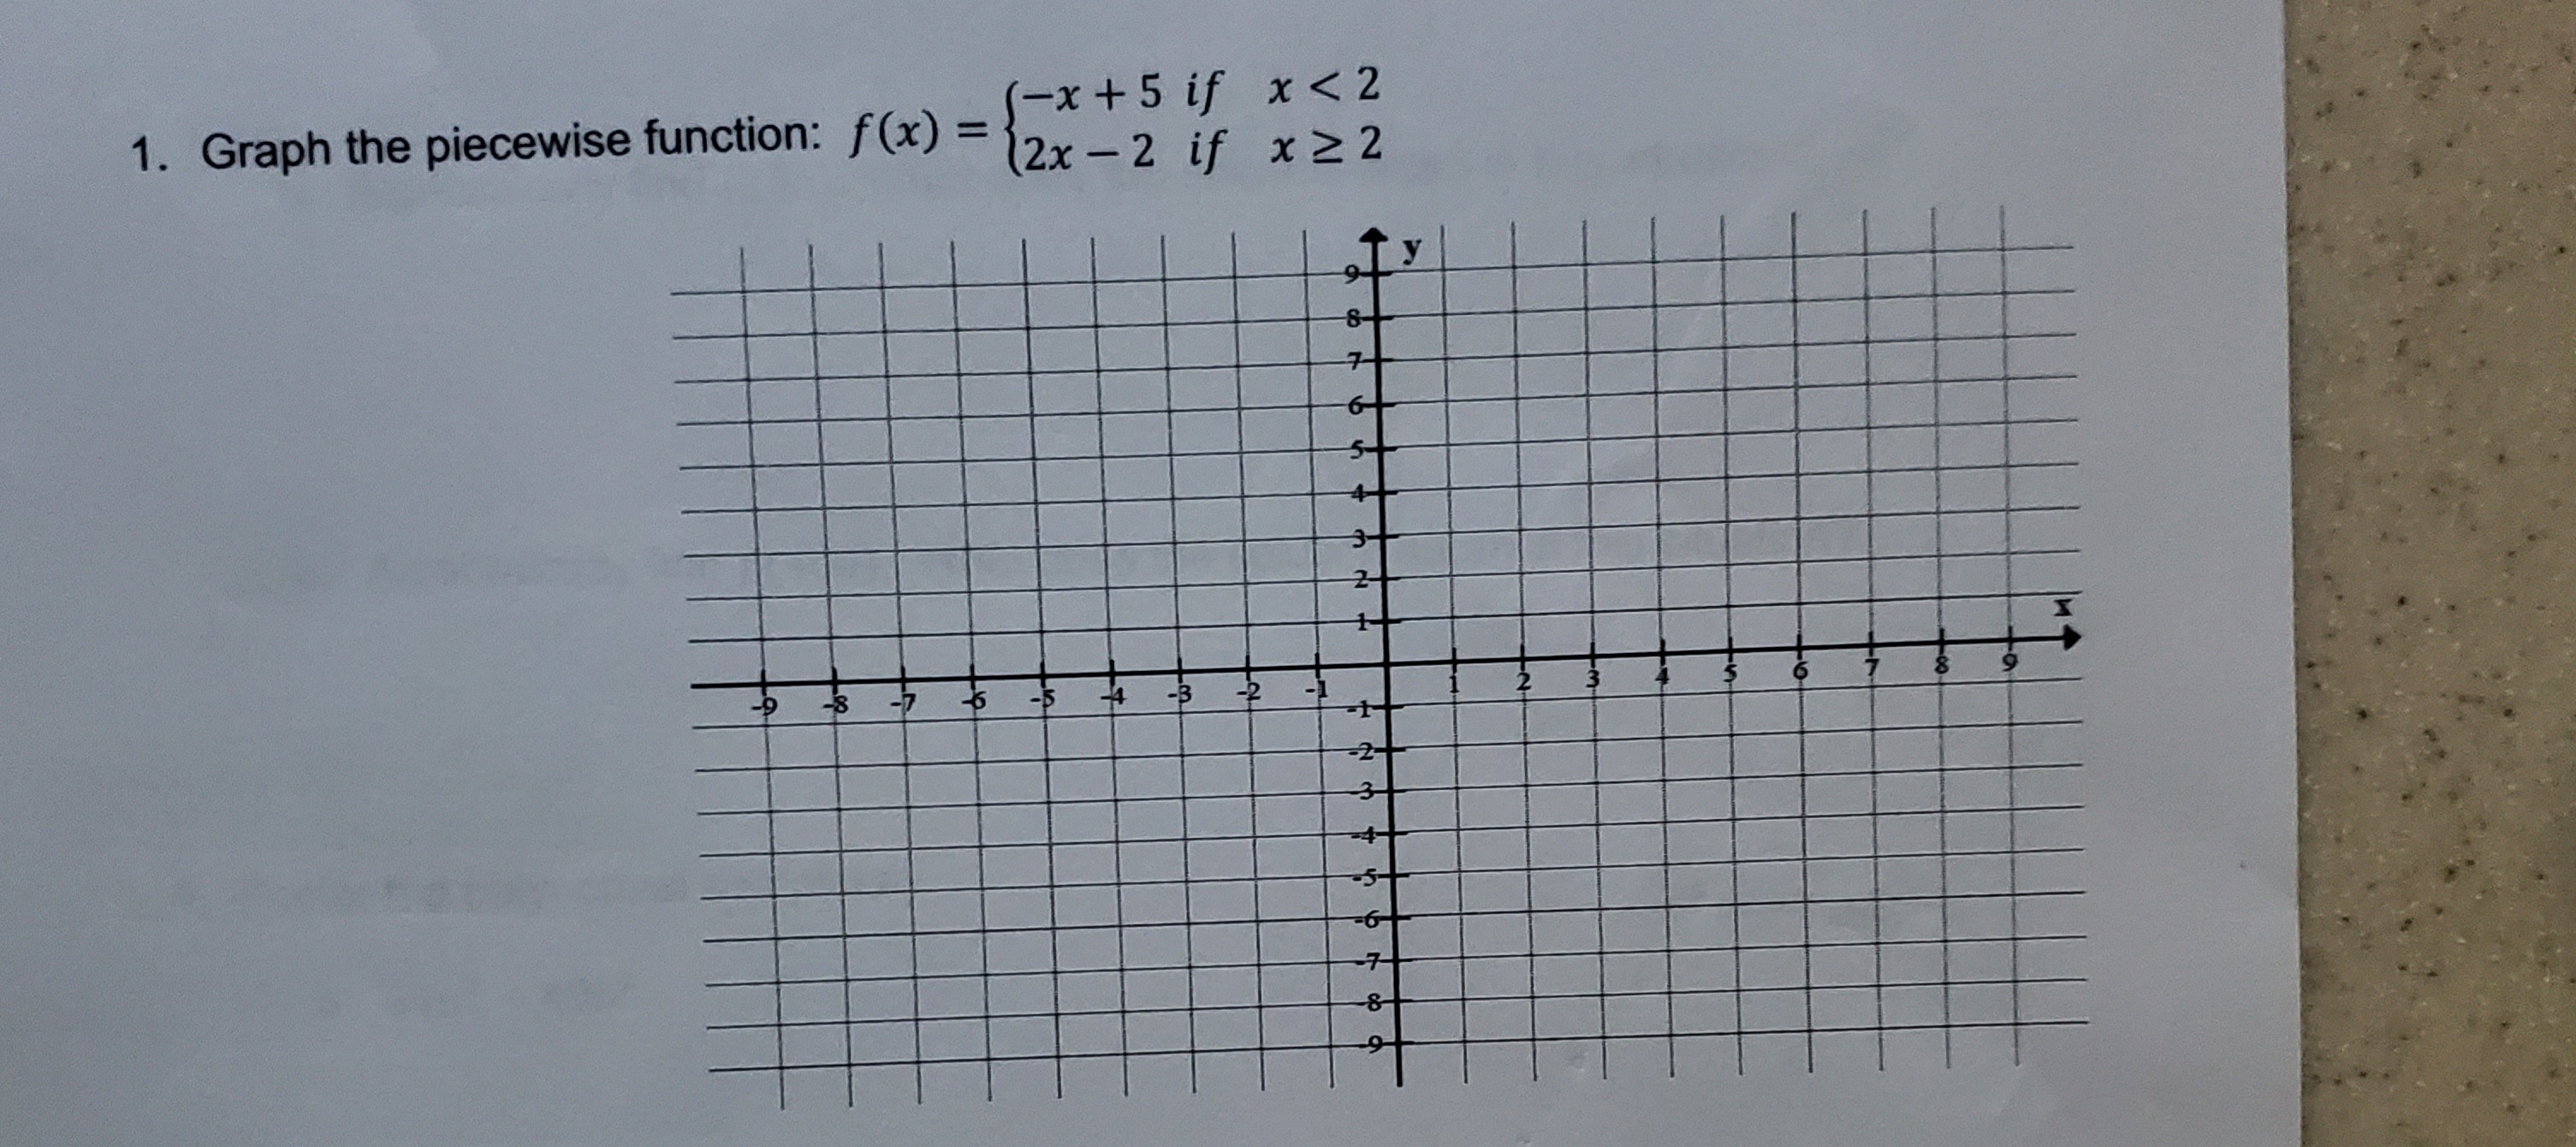 S-x +5 if x < 2
1. Graph the piecewise function: f(x) = 2x - 2 if x2 2
%3D
y
-7
-5
-B
-구
23
